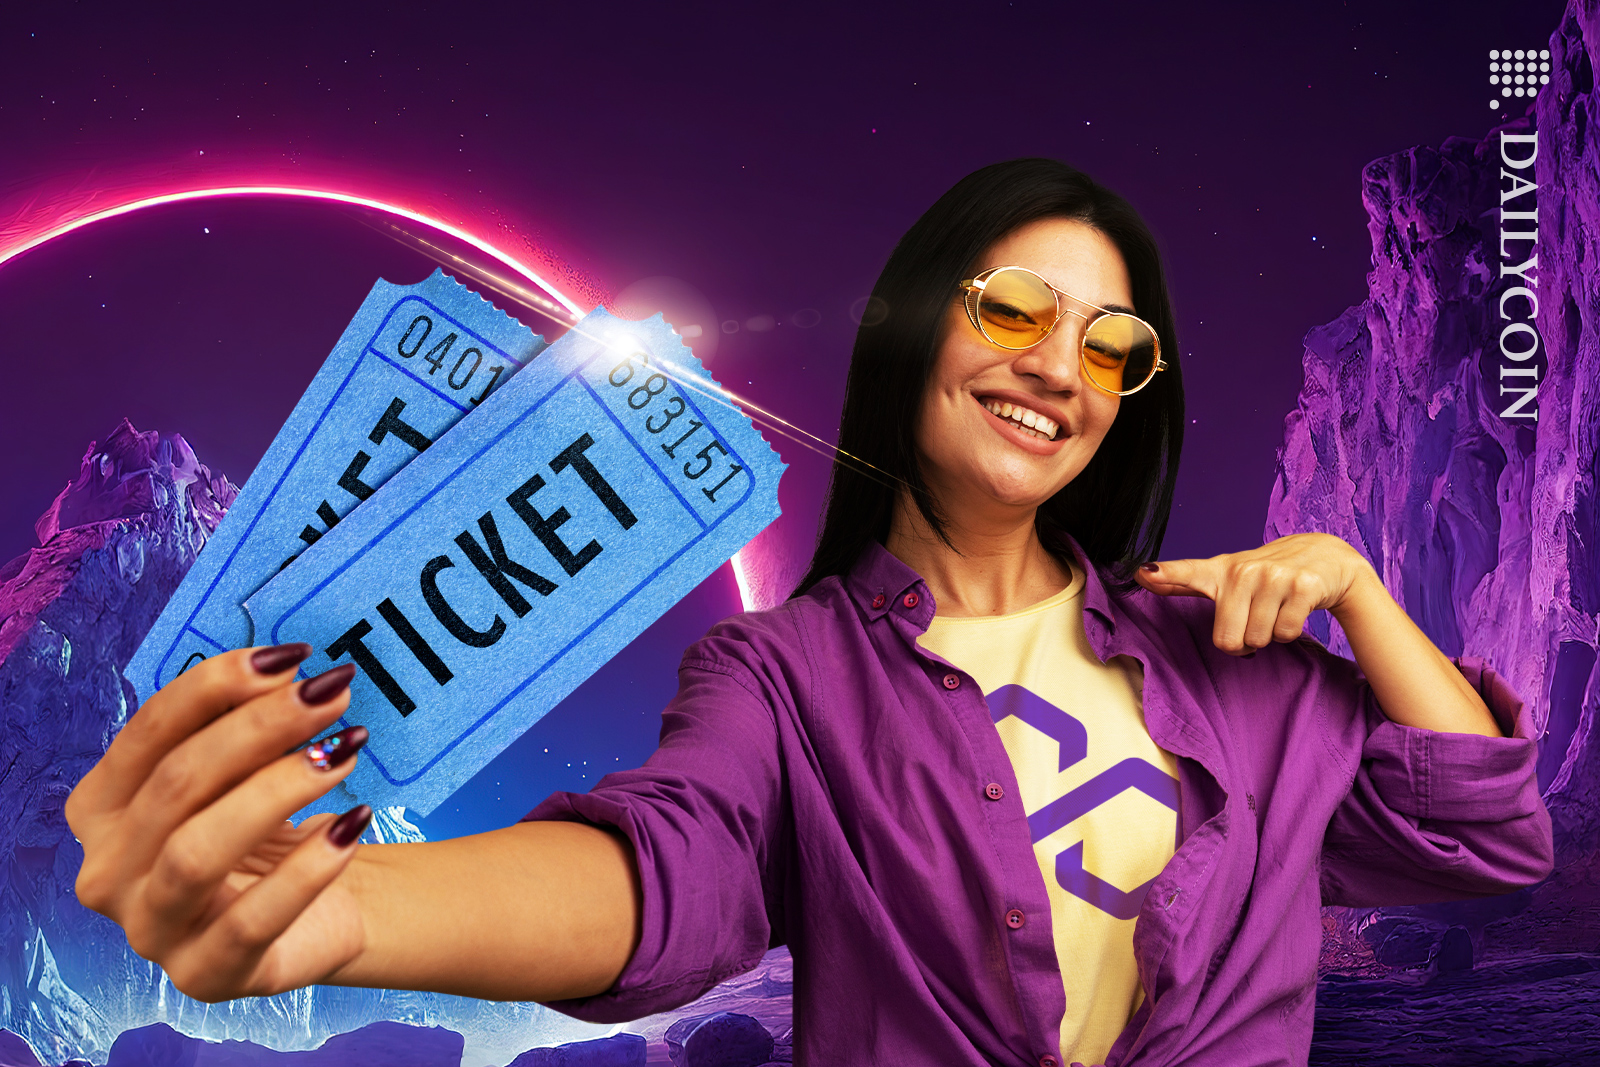 Woman with a Polygon T-shirt wearing sunglasses is holding two tickets and smiling at a neon land.